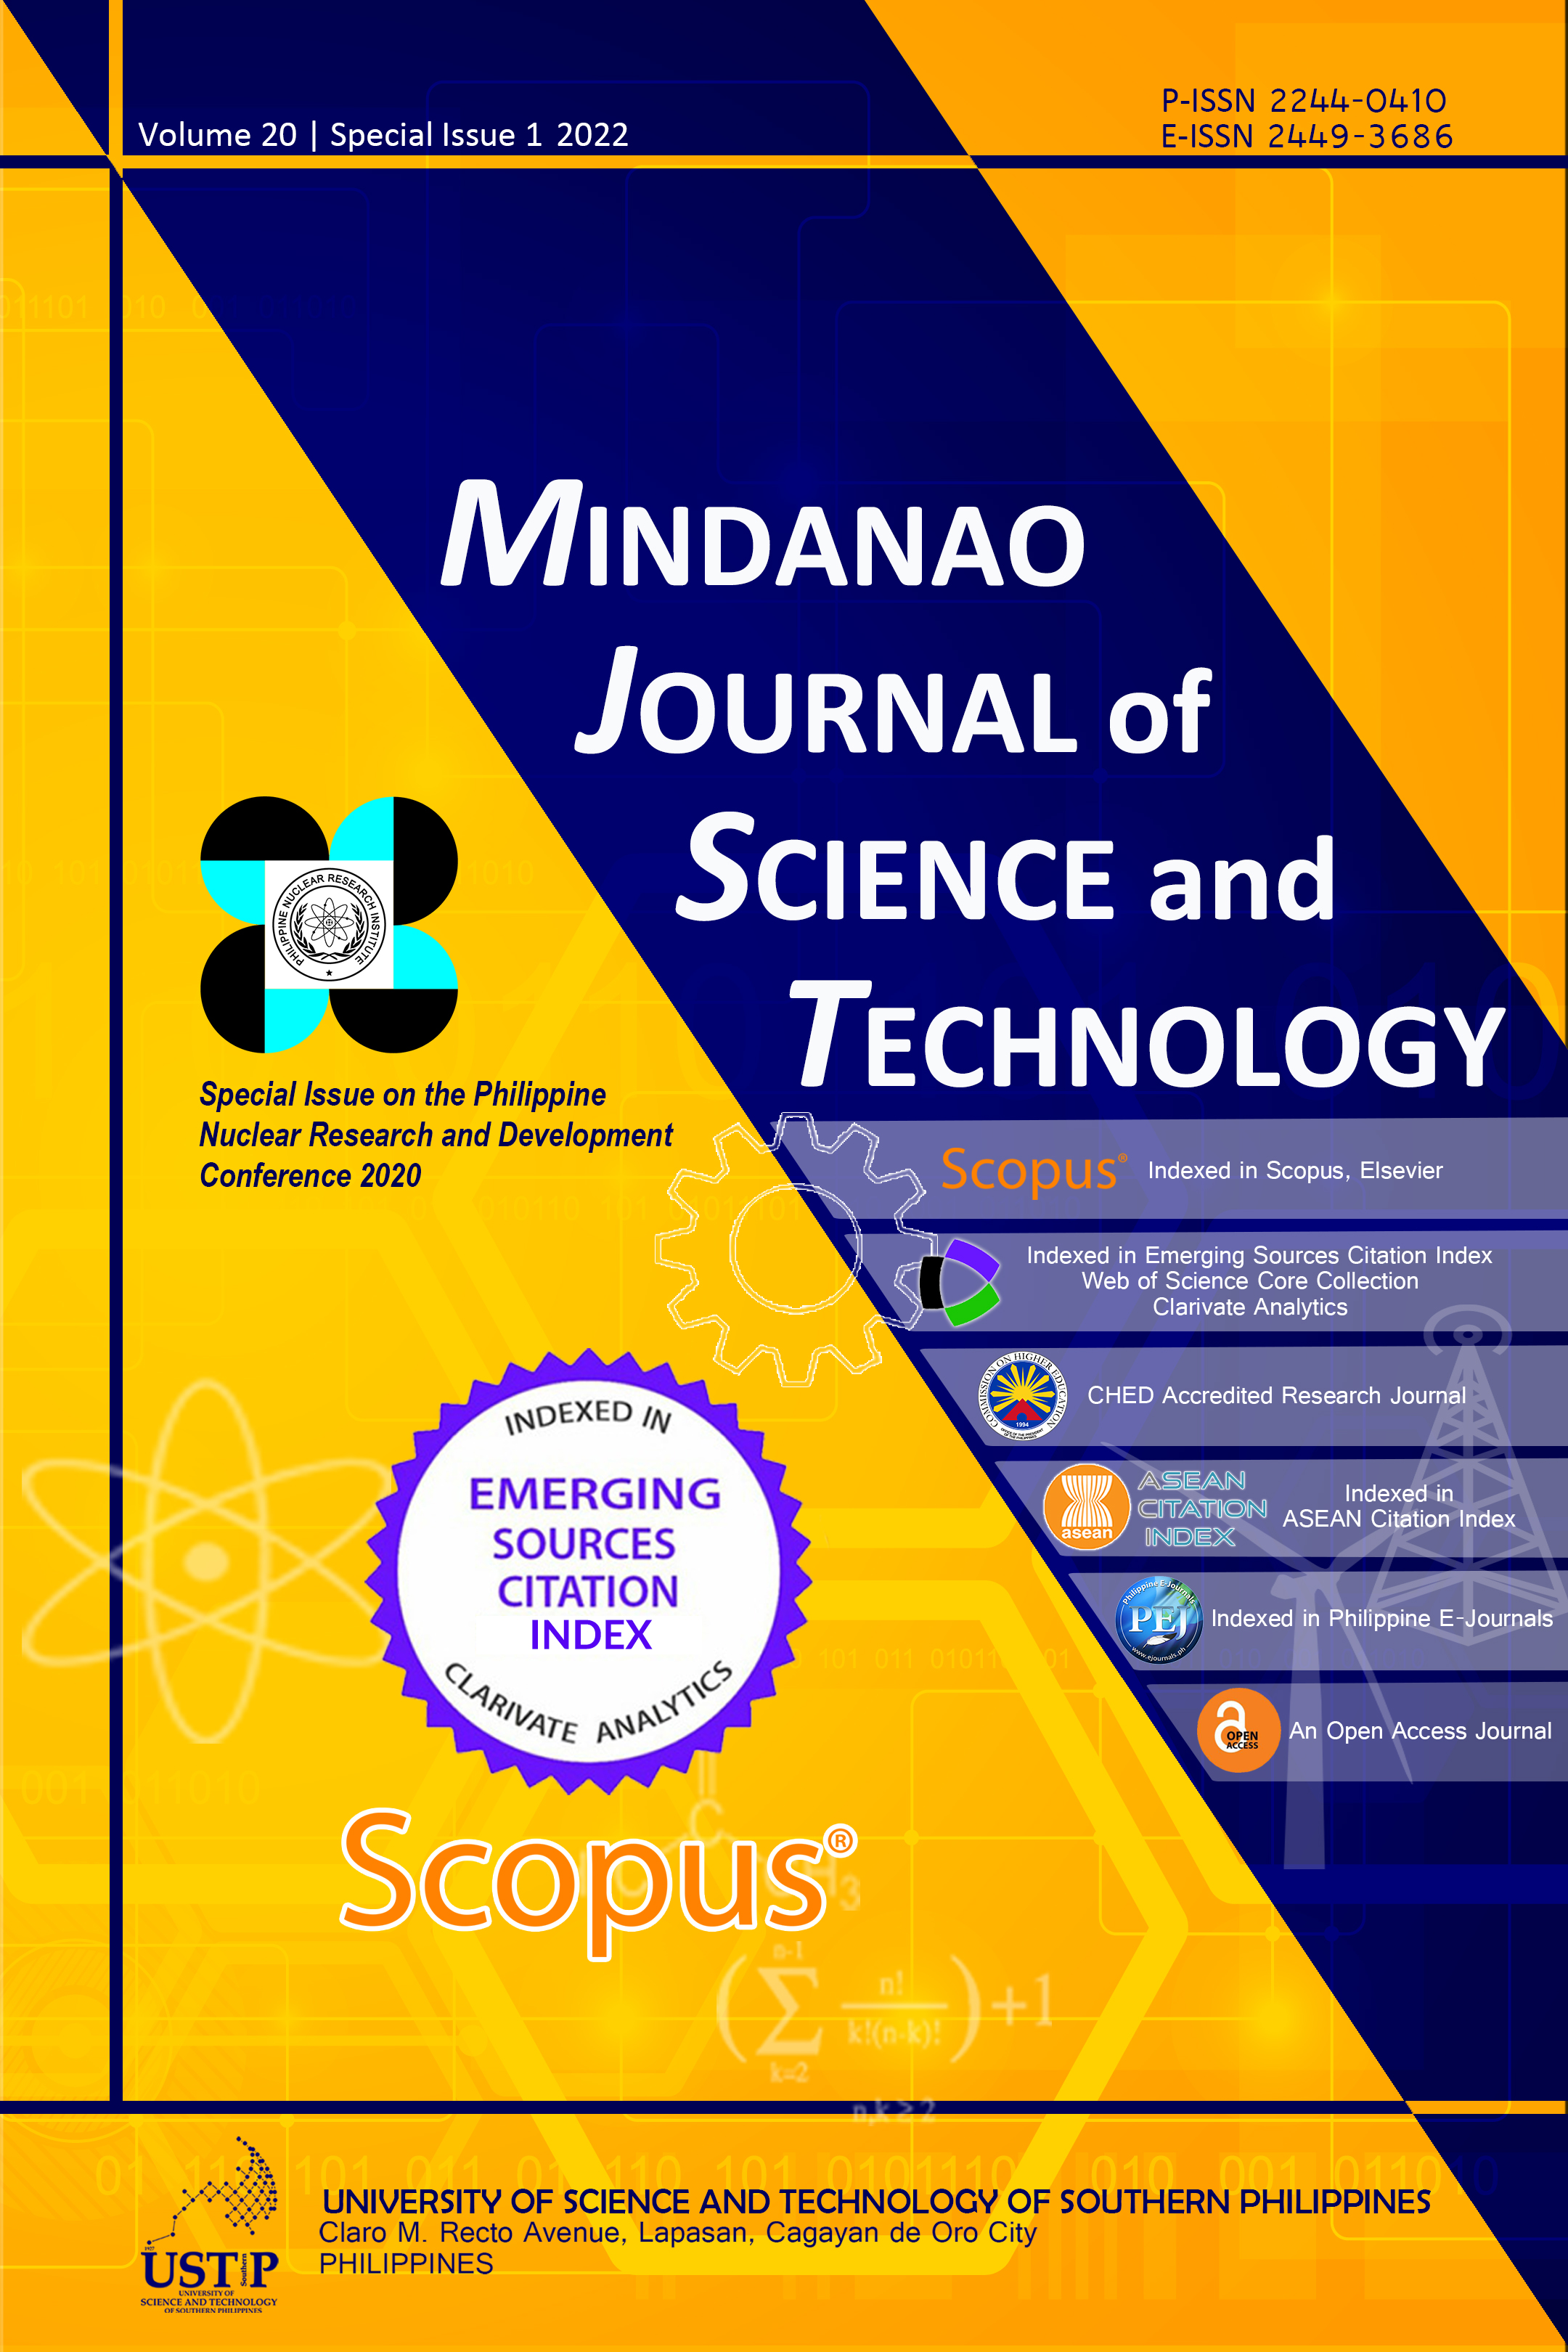 MJST Special Issue 1 Vol. 20 (2022) Cover